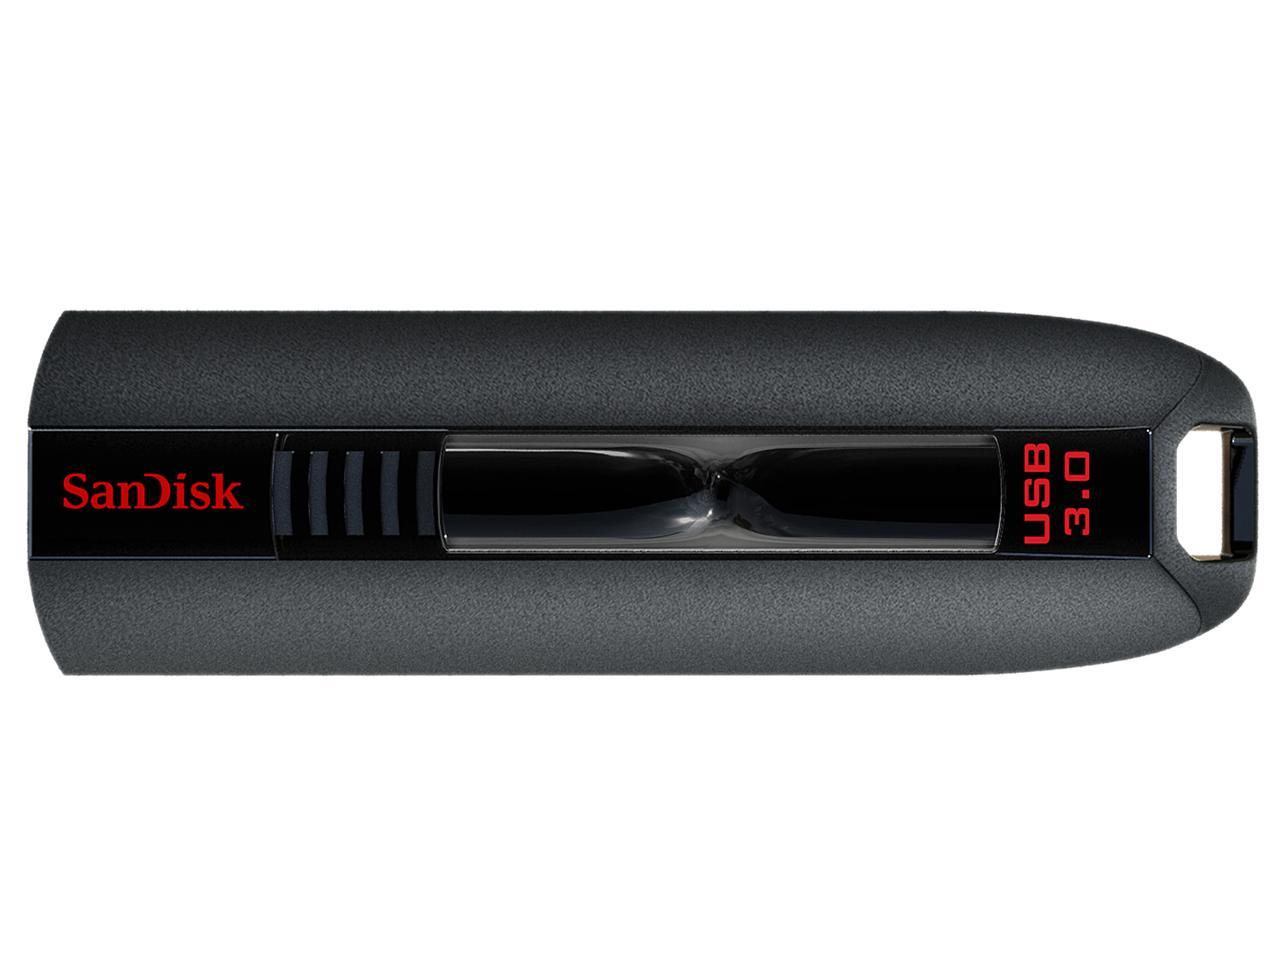 Limited nudler Avenue Open Box: SanDisk 32GB Extreme CZ80 USB 3.0 Flash Drive, Speed Up to  245MB/s (SDCZ80-032G-GAM46) - Newegg.com